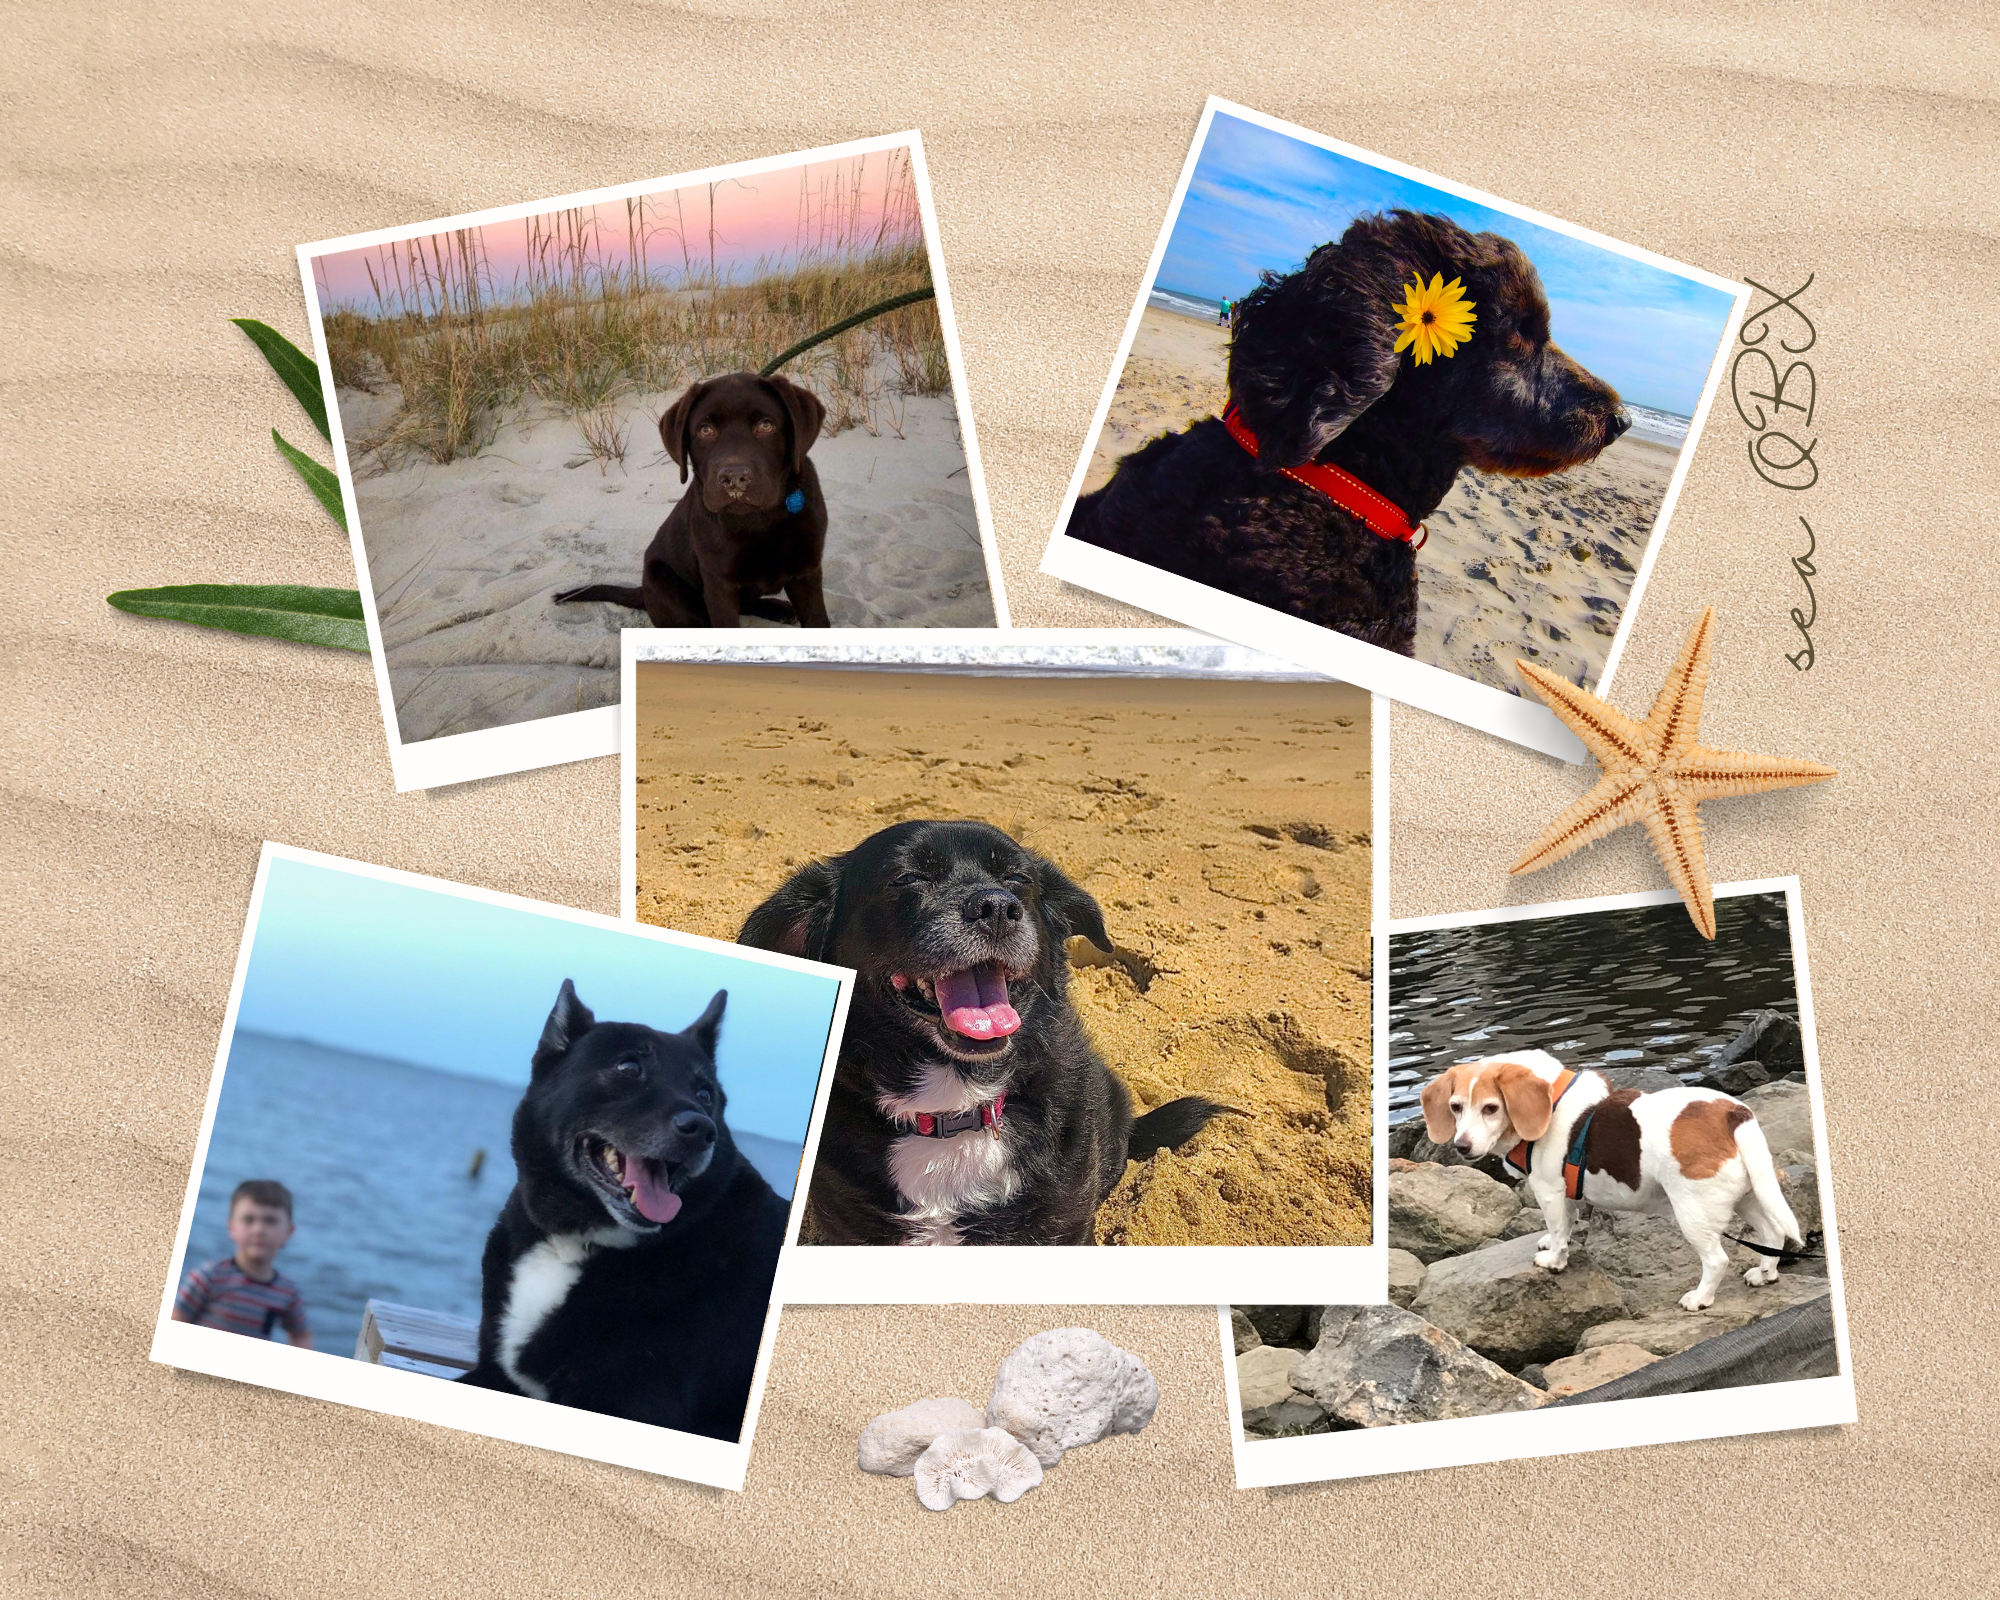 Collage of 5 photos: a black and white dog, black dog on the sound, beagle by the sound.